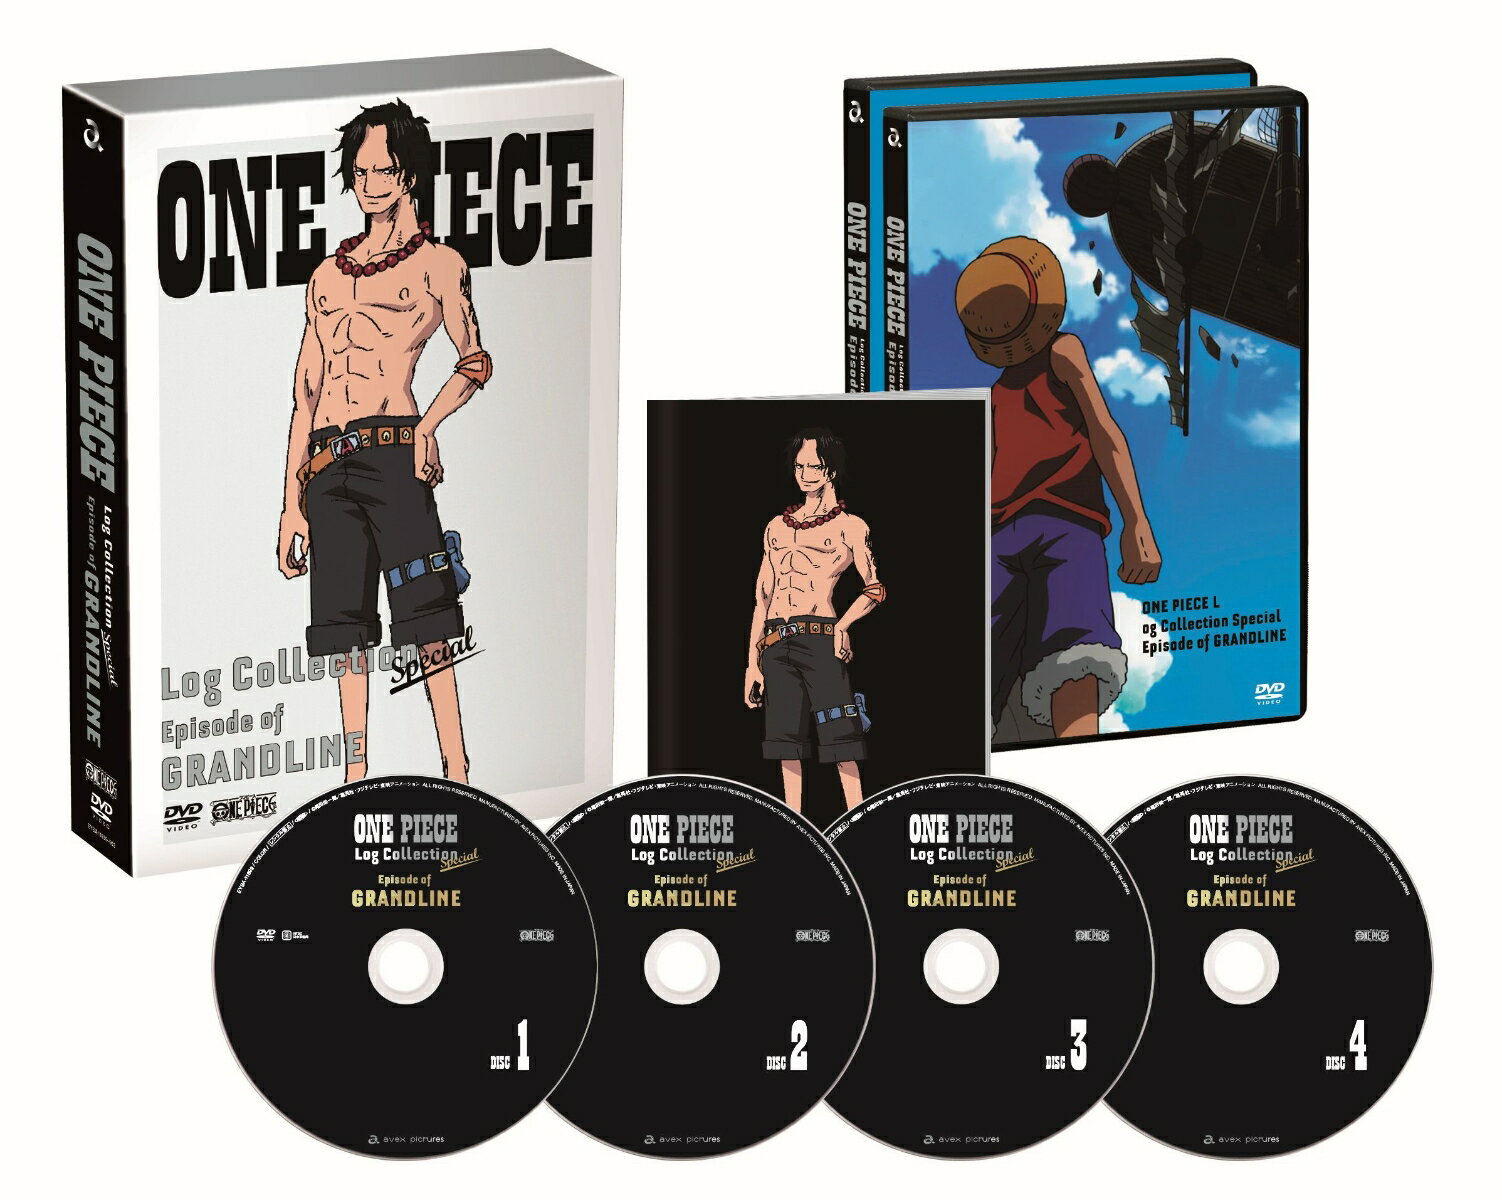 ONE PIECE Log Collection Special“Episode of GRANDLINE” 田中真弓